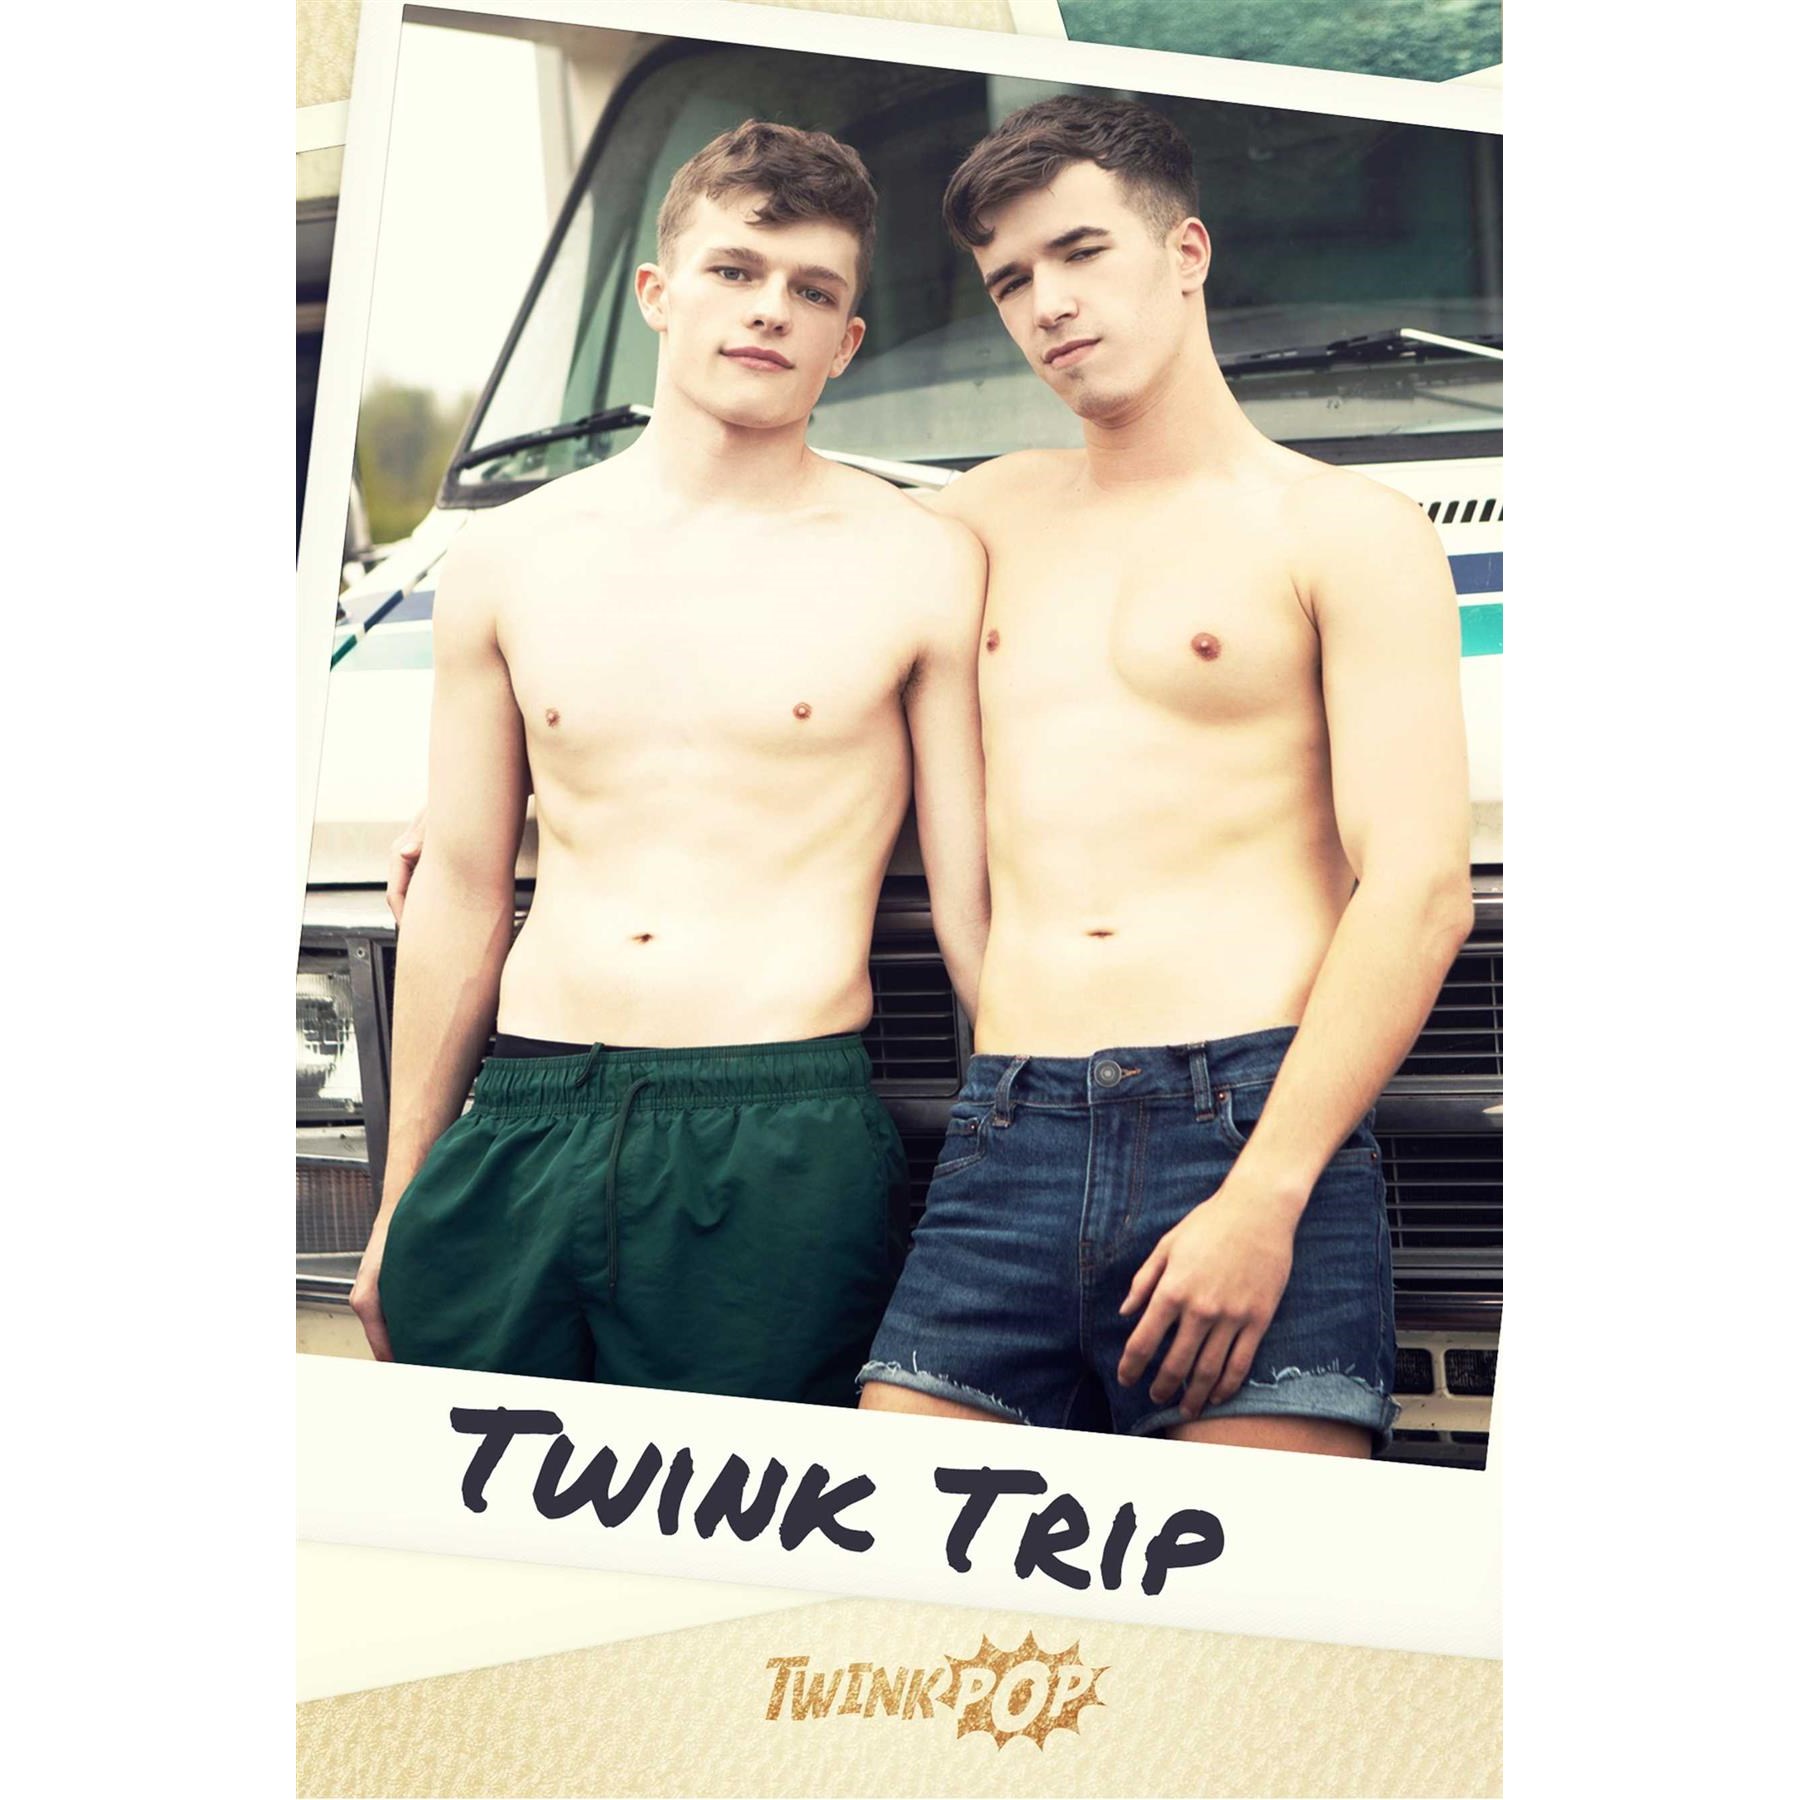 Two males posed topless twink trip